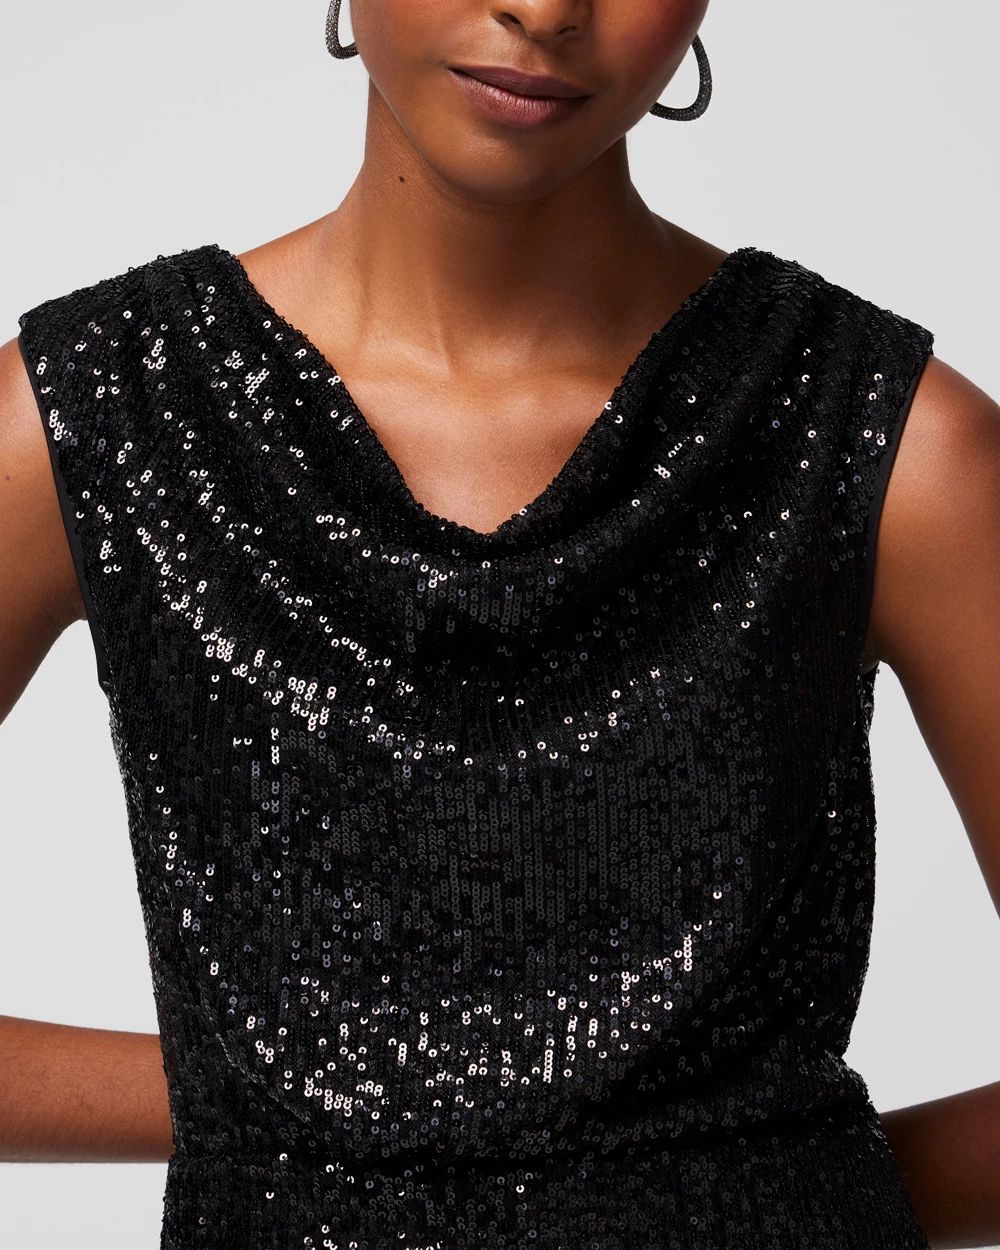 Sleeveless Sequin Draped Sheath Dress click to view larger image.